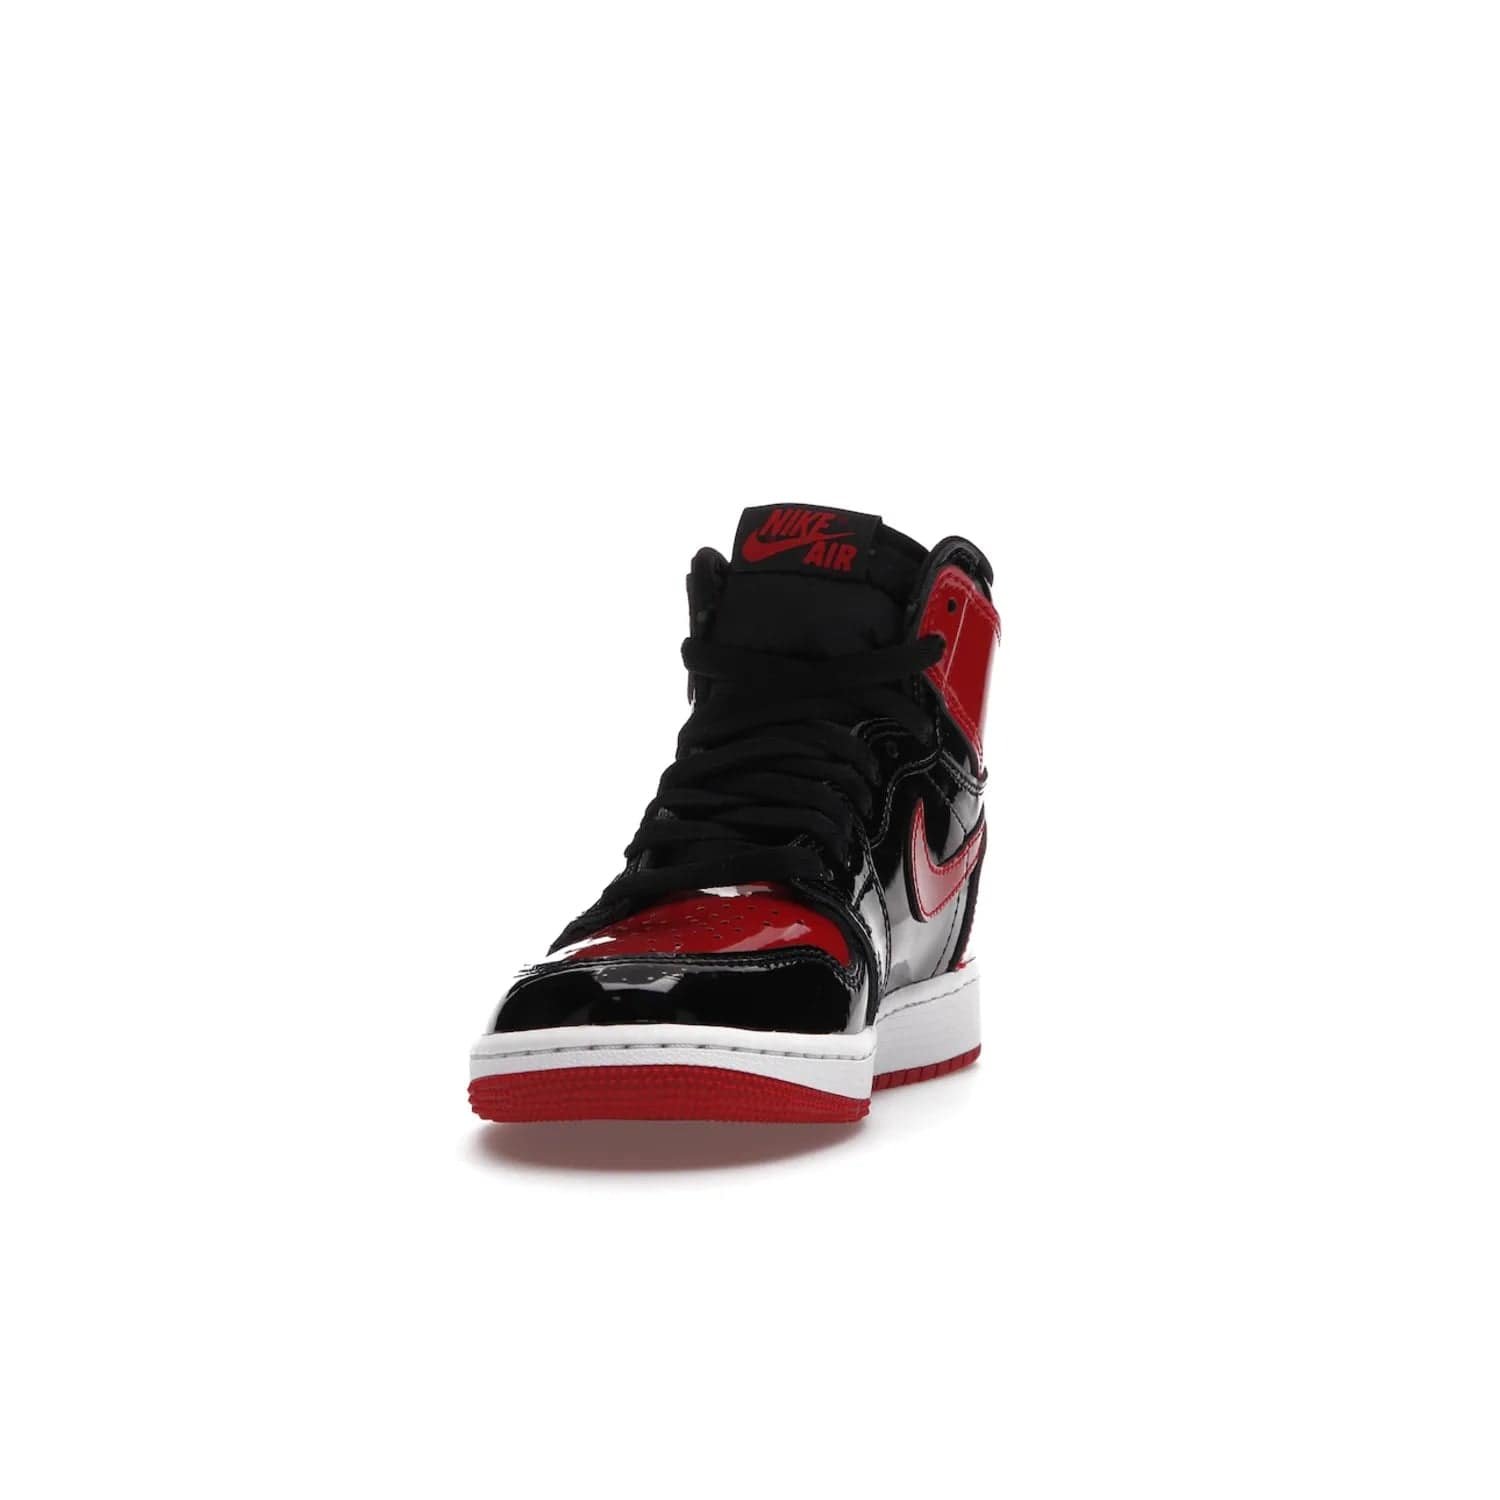 Jordan 1 Retro High OG Patent Bred (GS) - Image 12 - Only at www.BallersClubKickz.com - Upgrade your sneaker game with the iconic Air Jordan 1 Retro High OG Bred Patent GS. Crafted with premium patent leather and basketball-inspired details for a classic look, they also feature an encapsulated Air-sole cushioning and enhanced red rubber outsole. Don't miss this timeless sneaker with a striking black, white, and varsity red colorway, dropping December 2021.